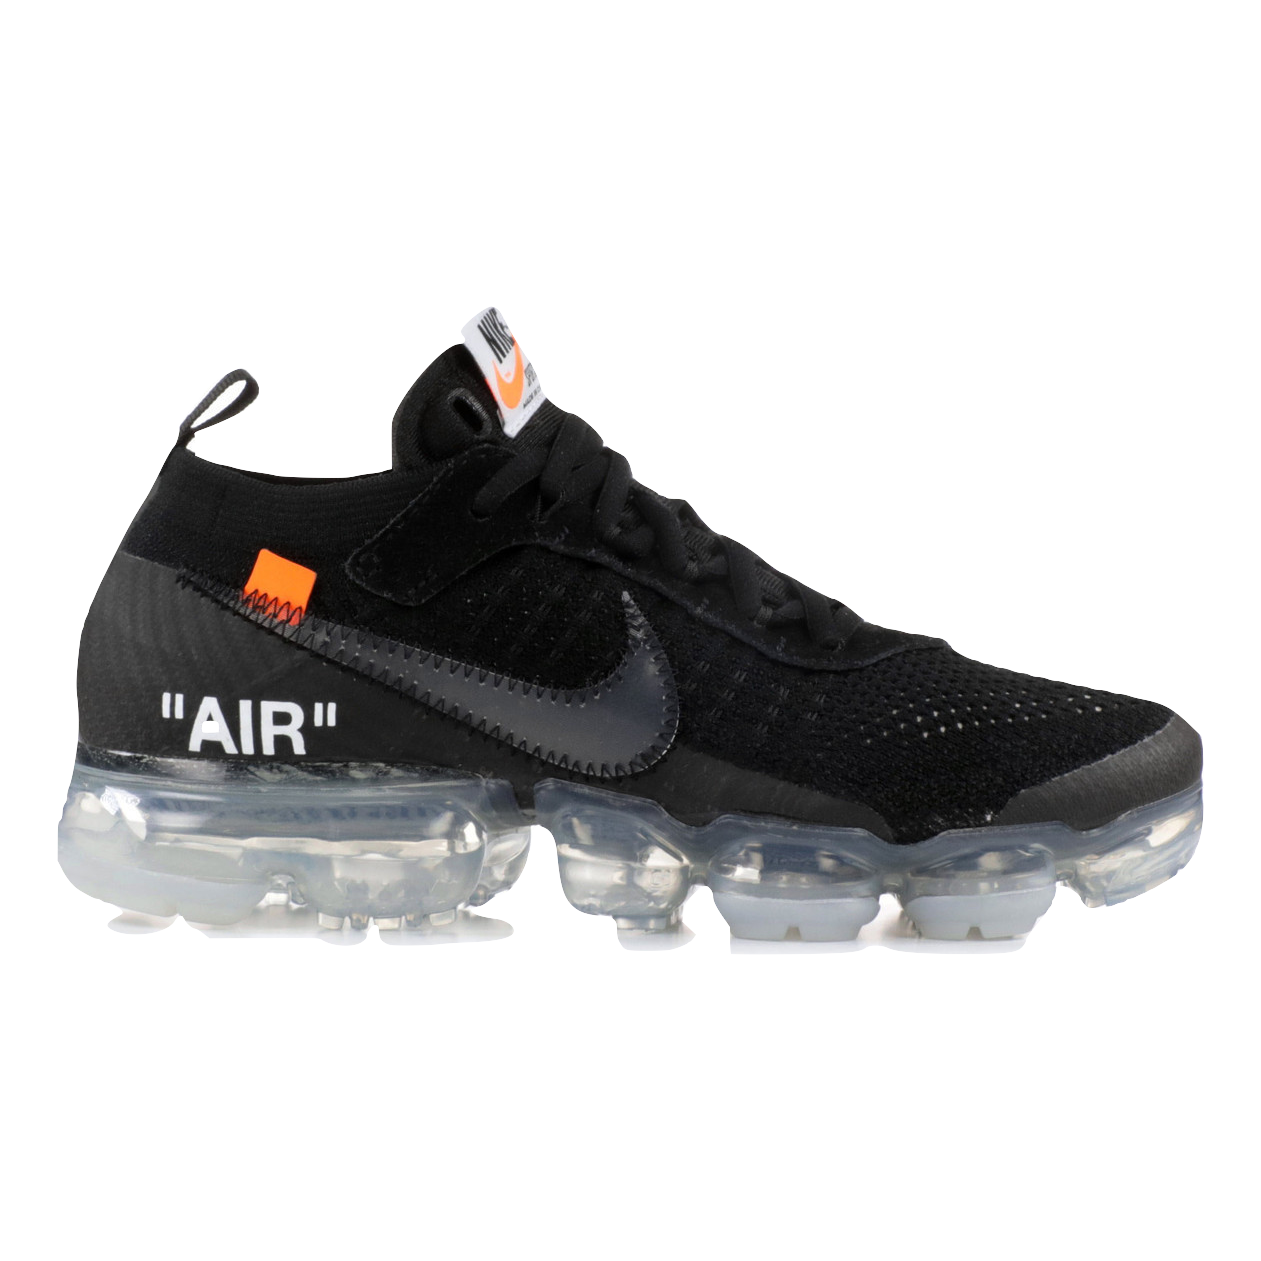 The 10: Nike Air Vapormax FK OFF WHITE - Black - Used